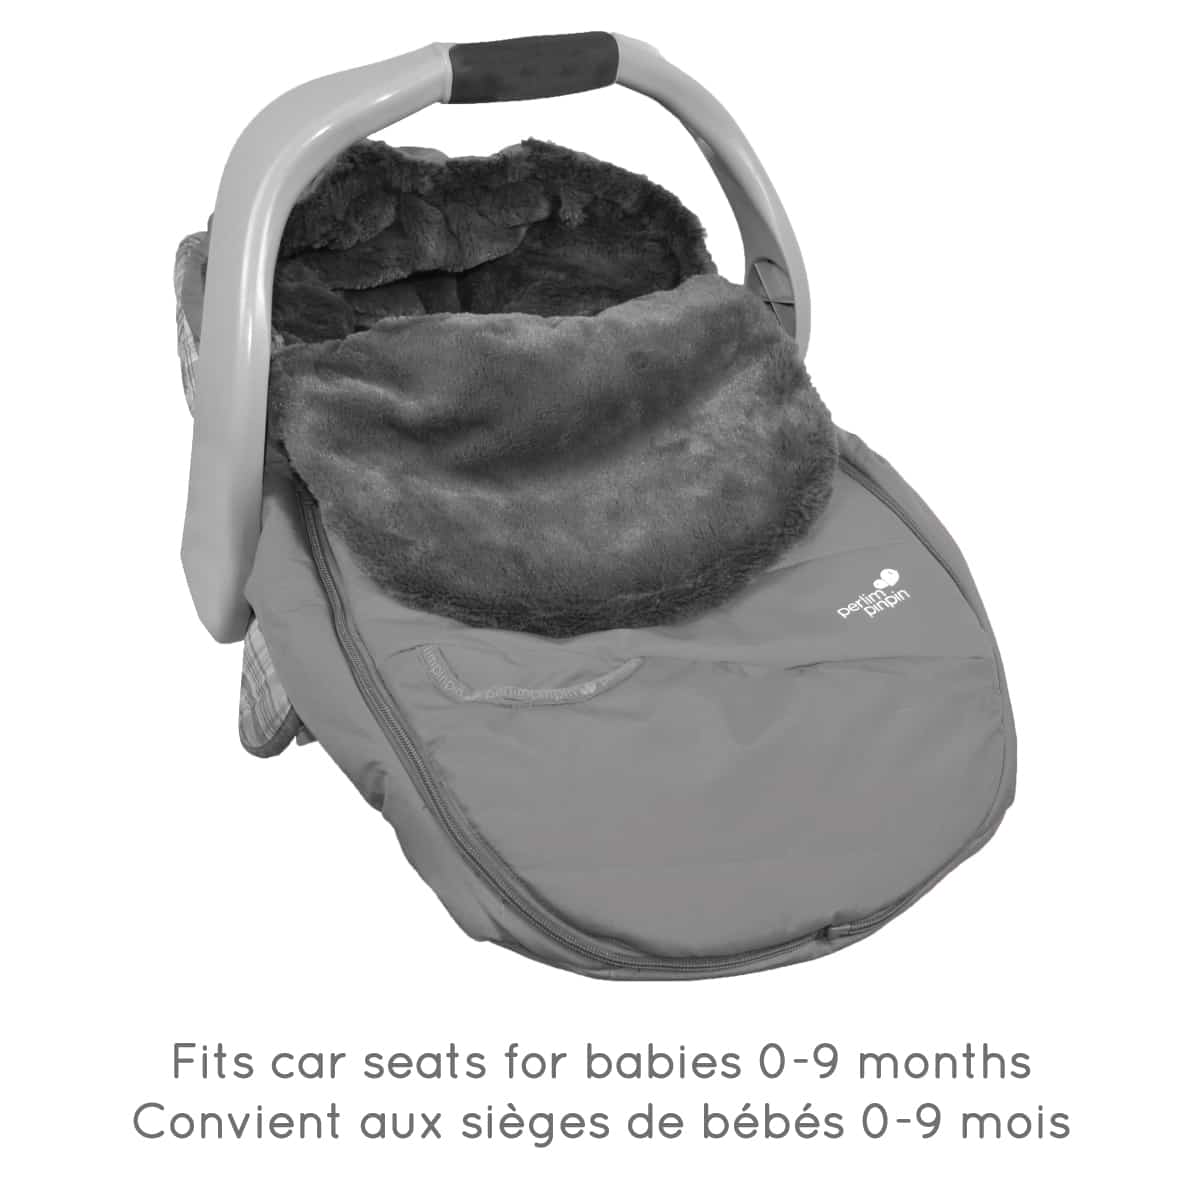 Baby car seat cover for winter - Clementine